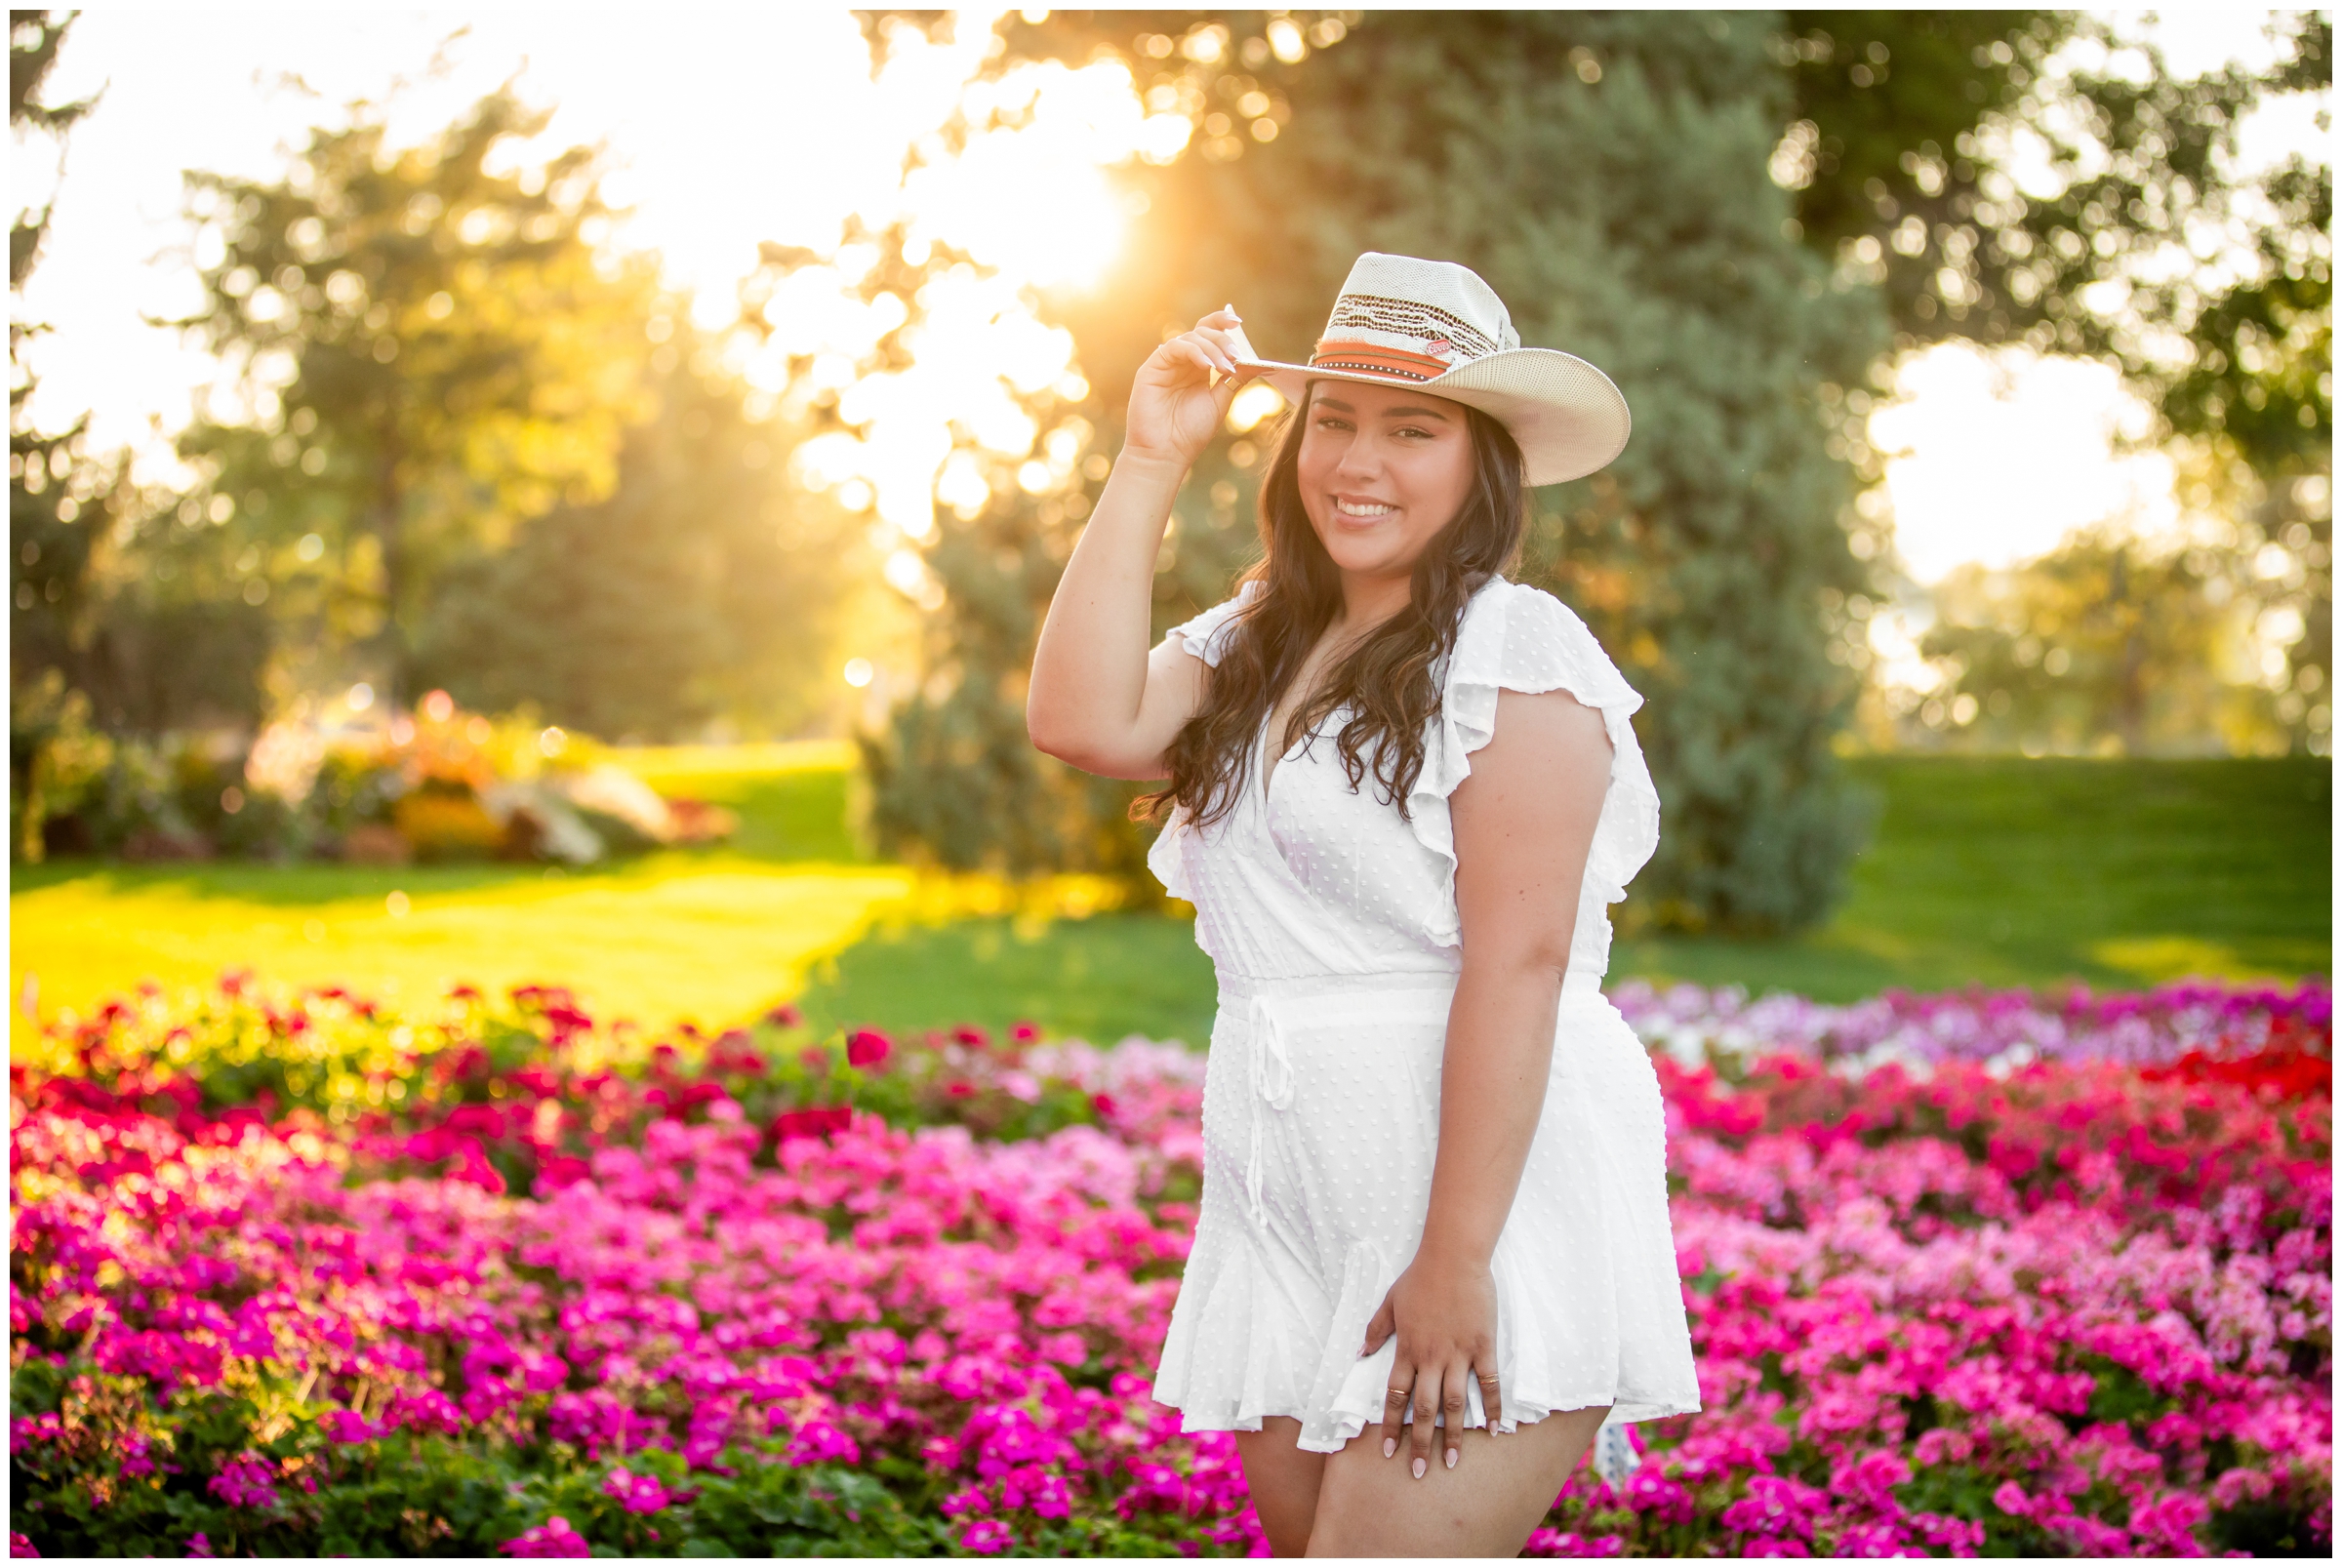 sunny flower gardens senior pictures inspiration in Fort Collins Colorado 